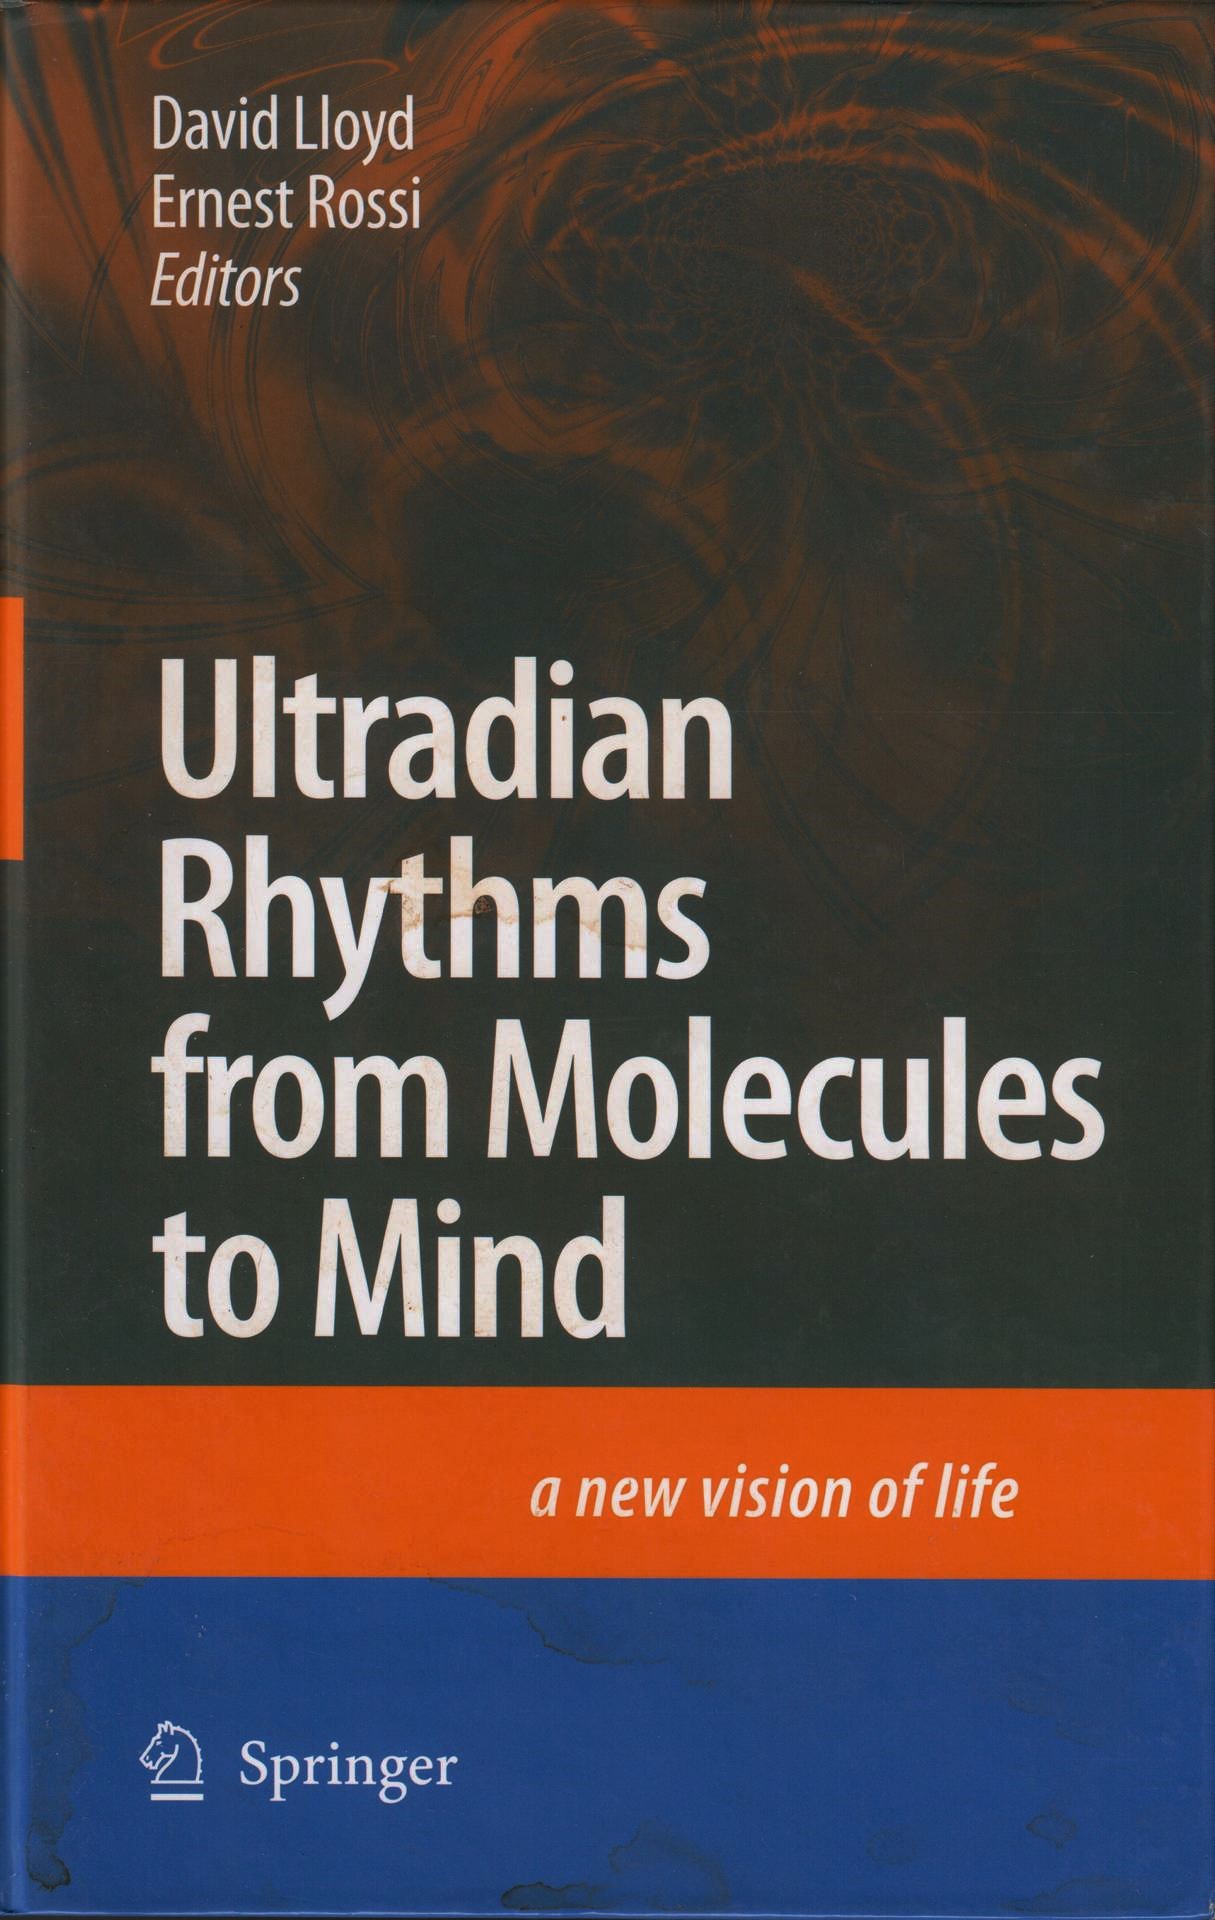 ultradian-rhythms-molecules-to-mind-cover